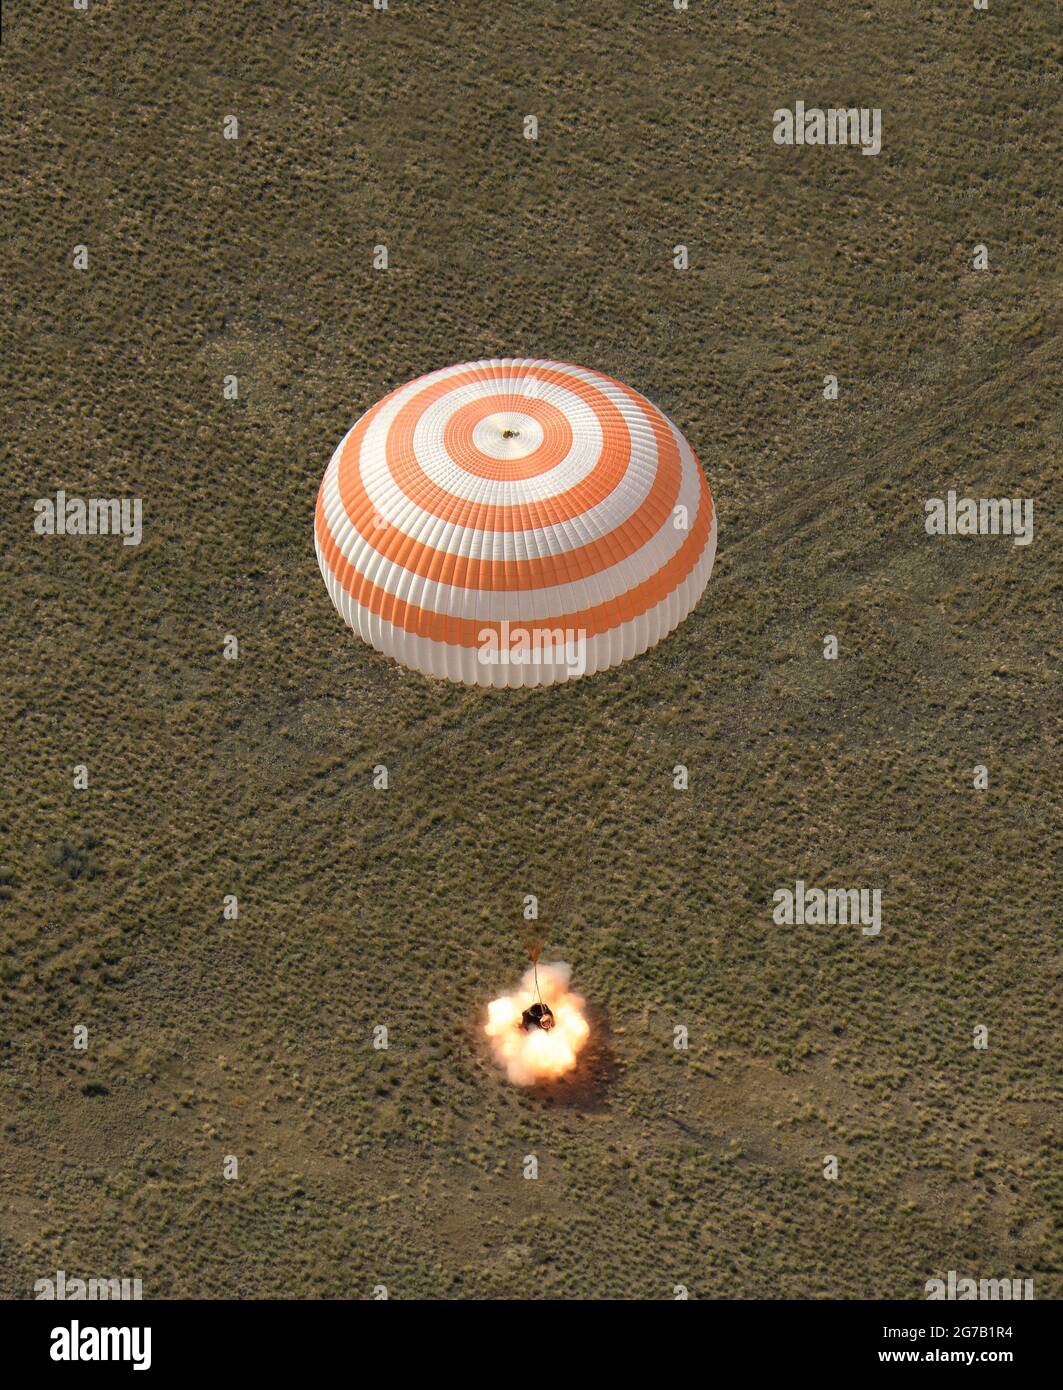 The Soyuz MS-11 spacecraft lands in a remote area near the town of Zhezkazgan, Kazakhstan with Expedition 59 crew members Anne McClain of NASA, David Saint-Jacques of the Canadian Space Agency, and Oleg Kononenko of Roscosmos, 25 June 2019 . Returning from the International Space Station.  A unique, optimised and digitally enhanced version of an NASA image by senior NASA photographer Bill Ingalis / credit NAS. Stock Photo